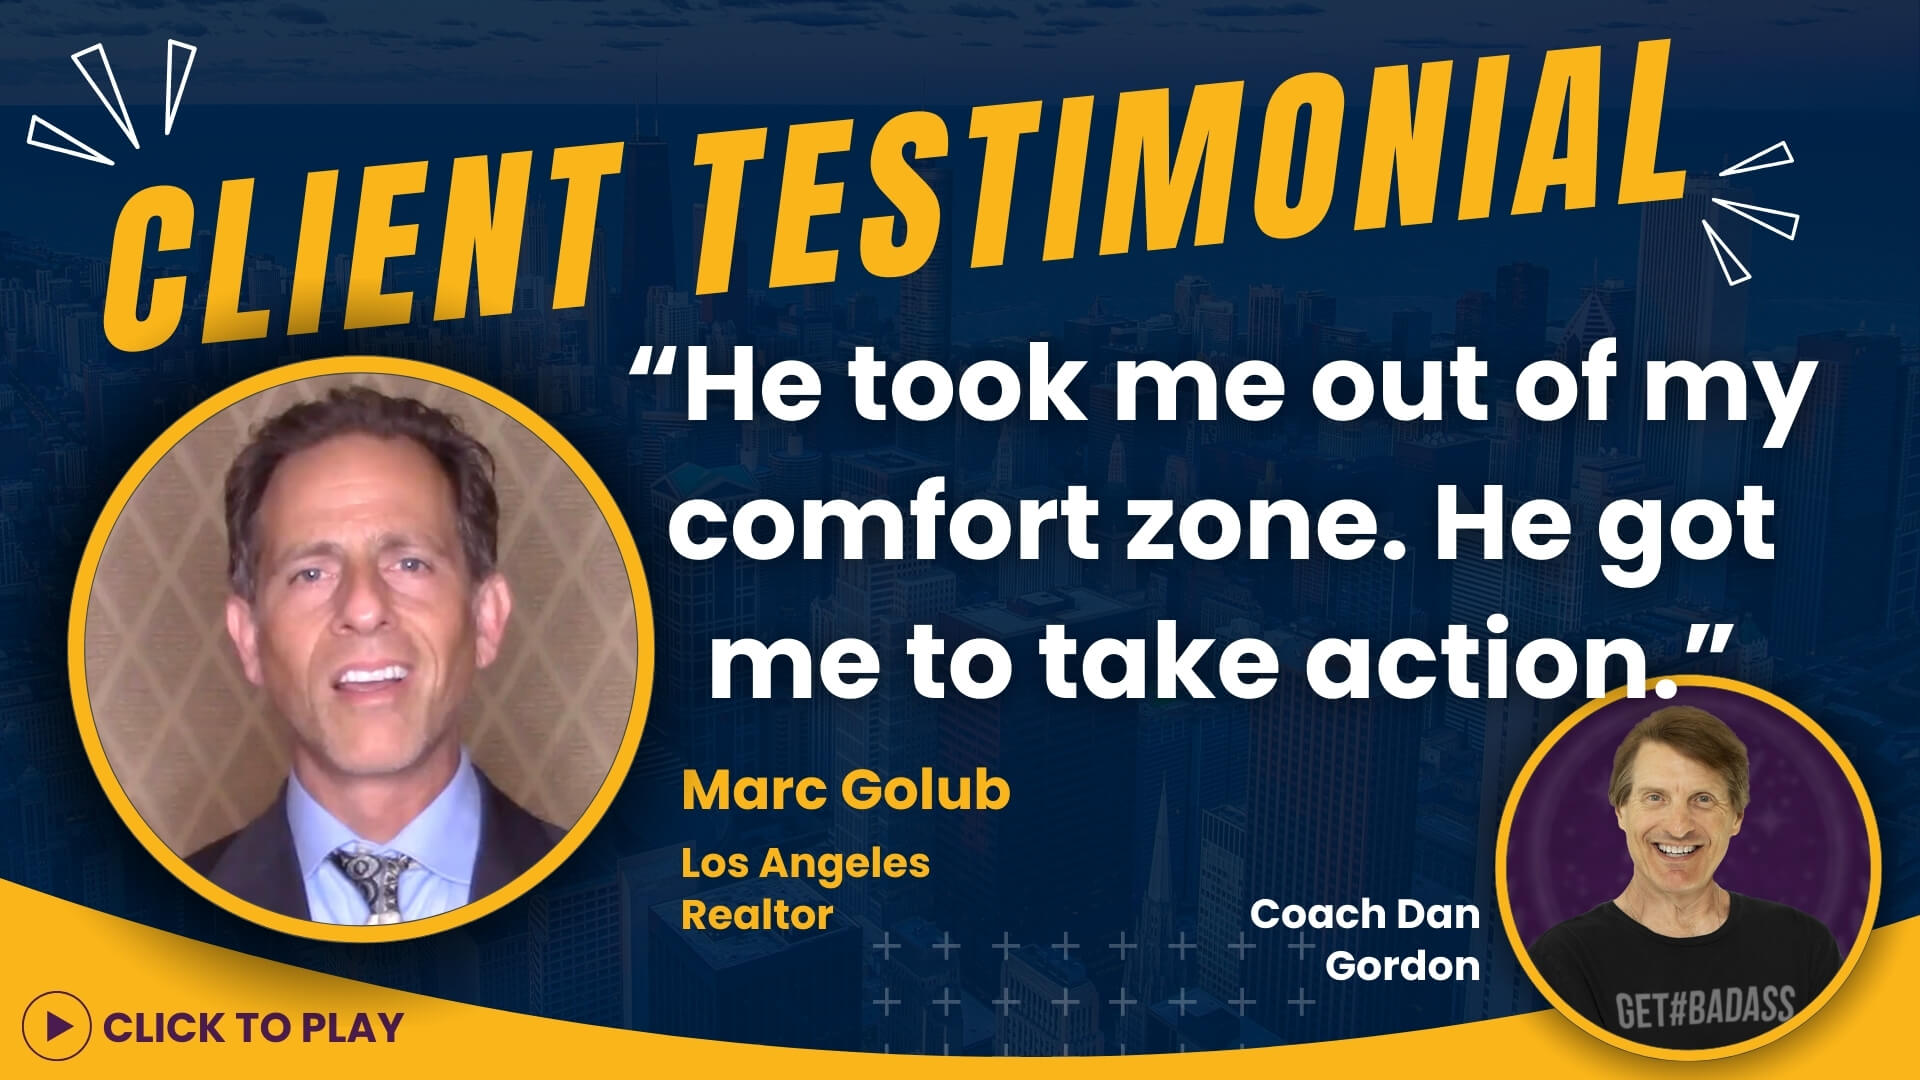 Marc Golub, Los Angeles Realtor, shares a video testimonial about Coach Dan Gordon, depicted with smiling portraits and a glowing endorsement quote.